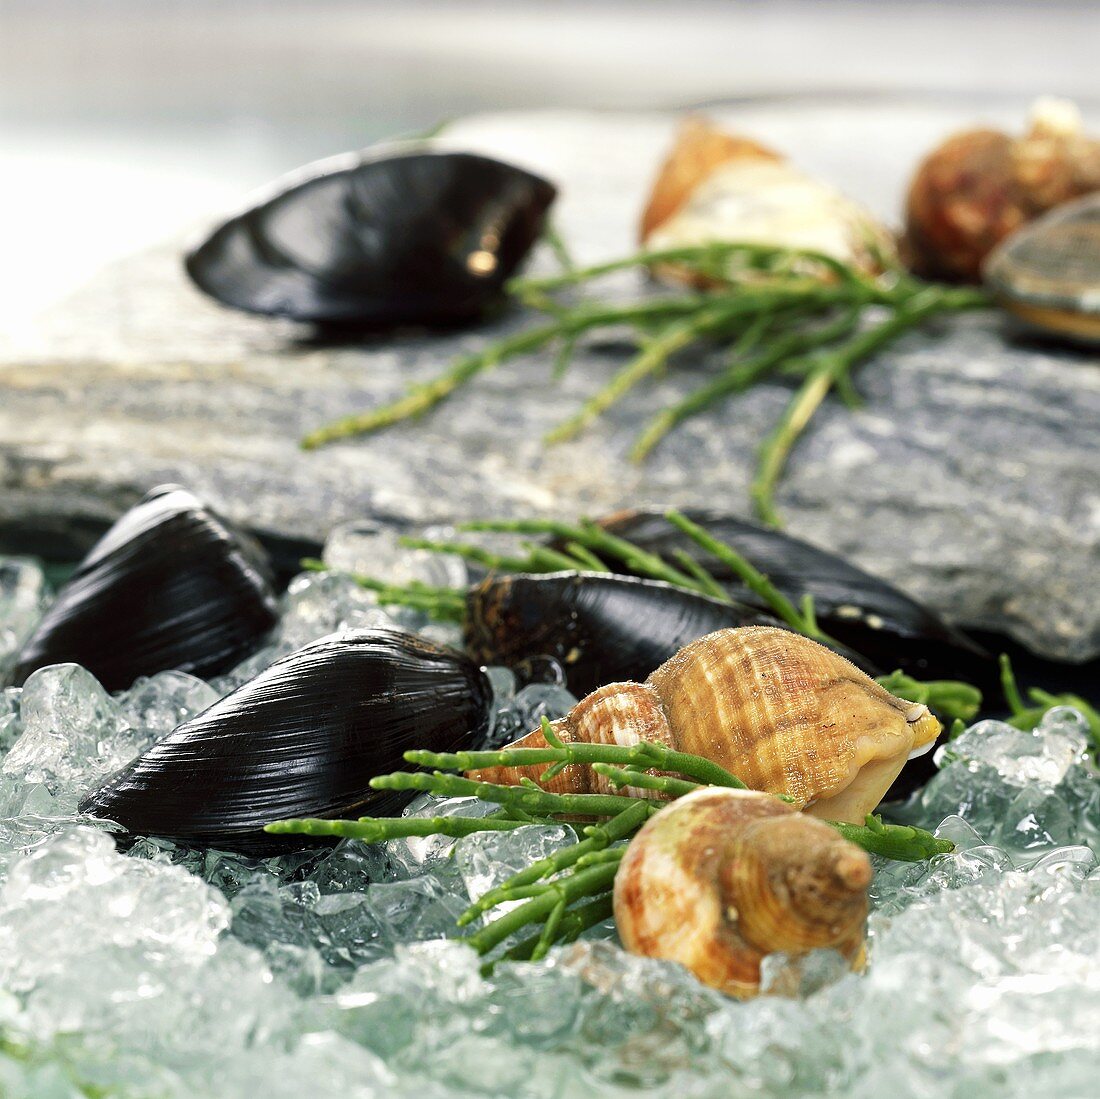 Mussels and shells on crushed ice, close-up